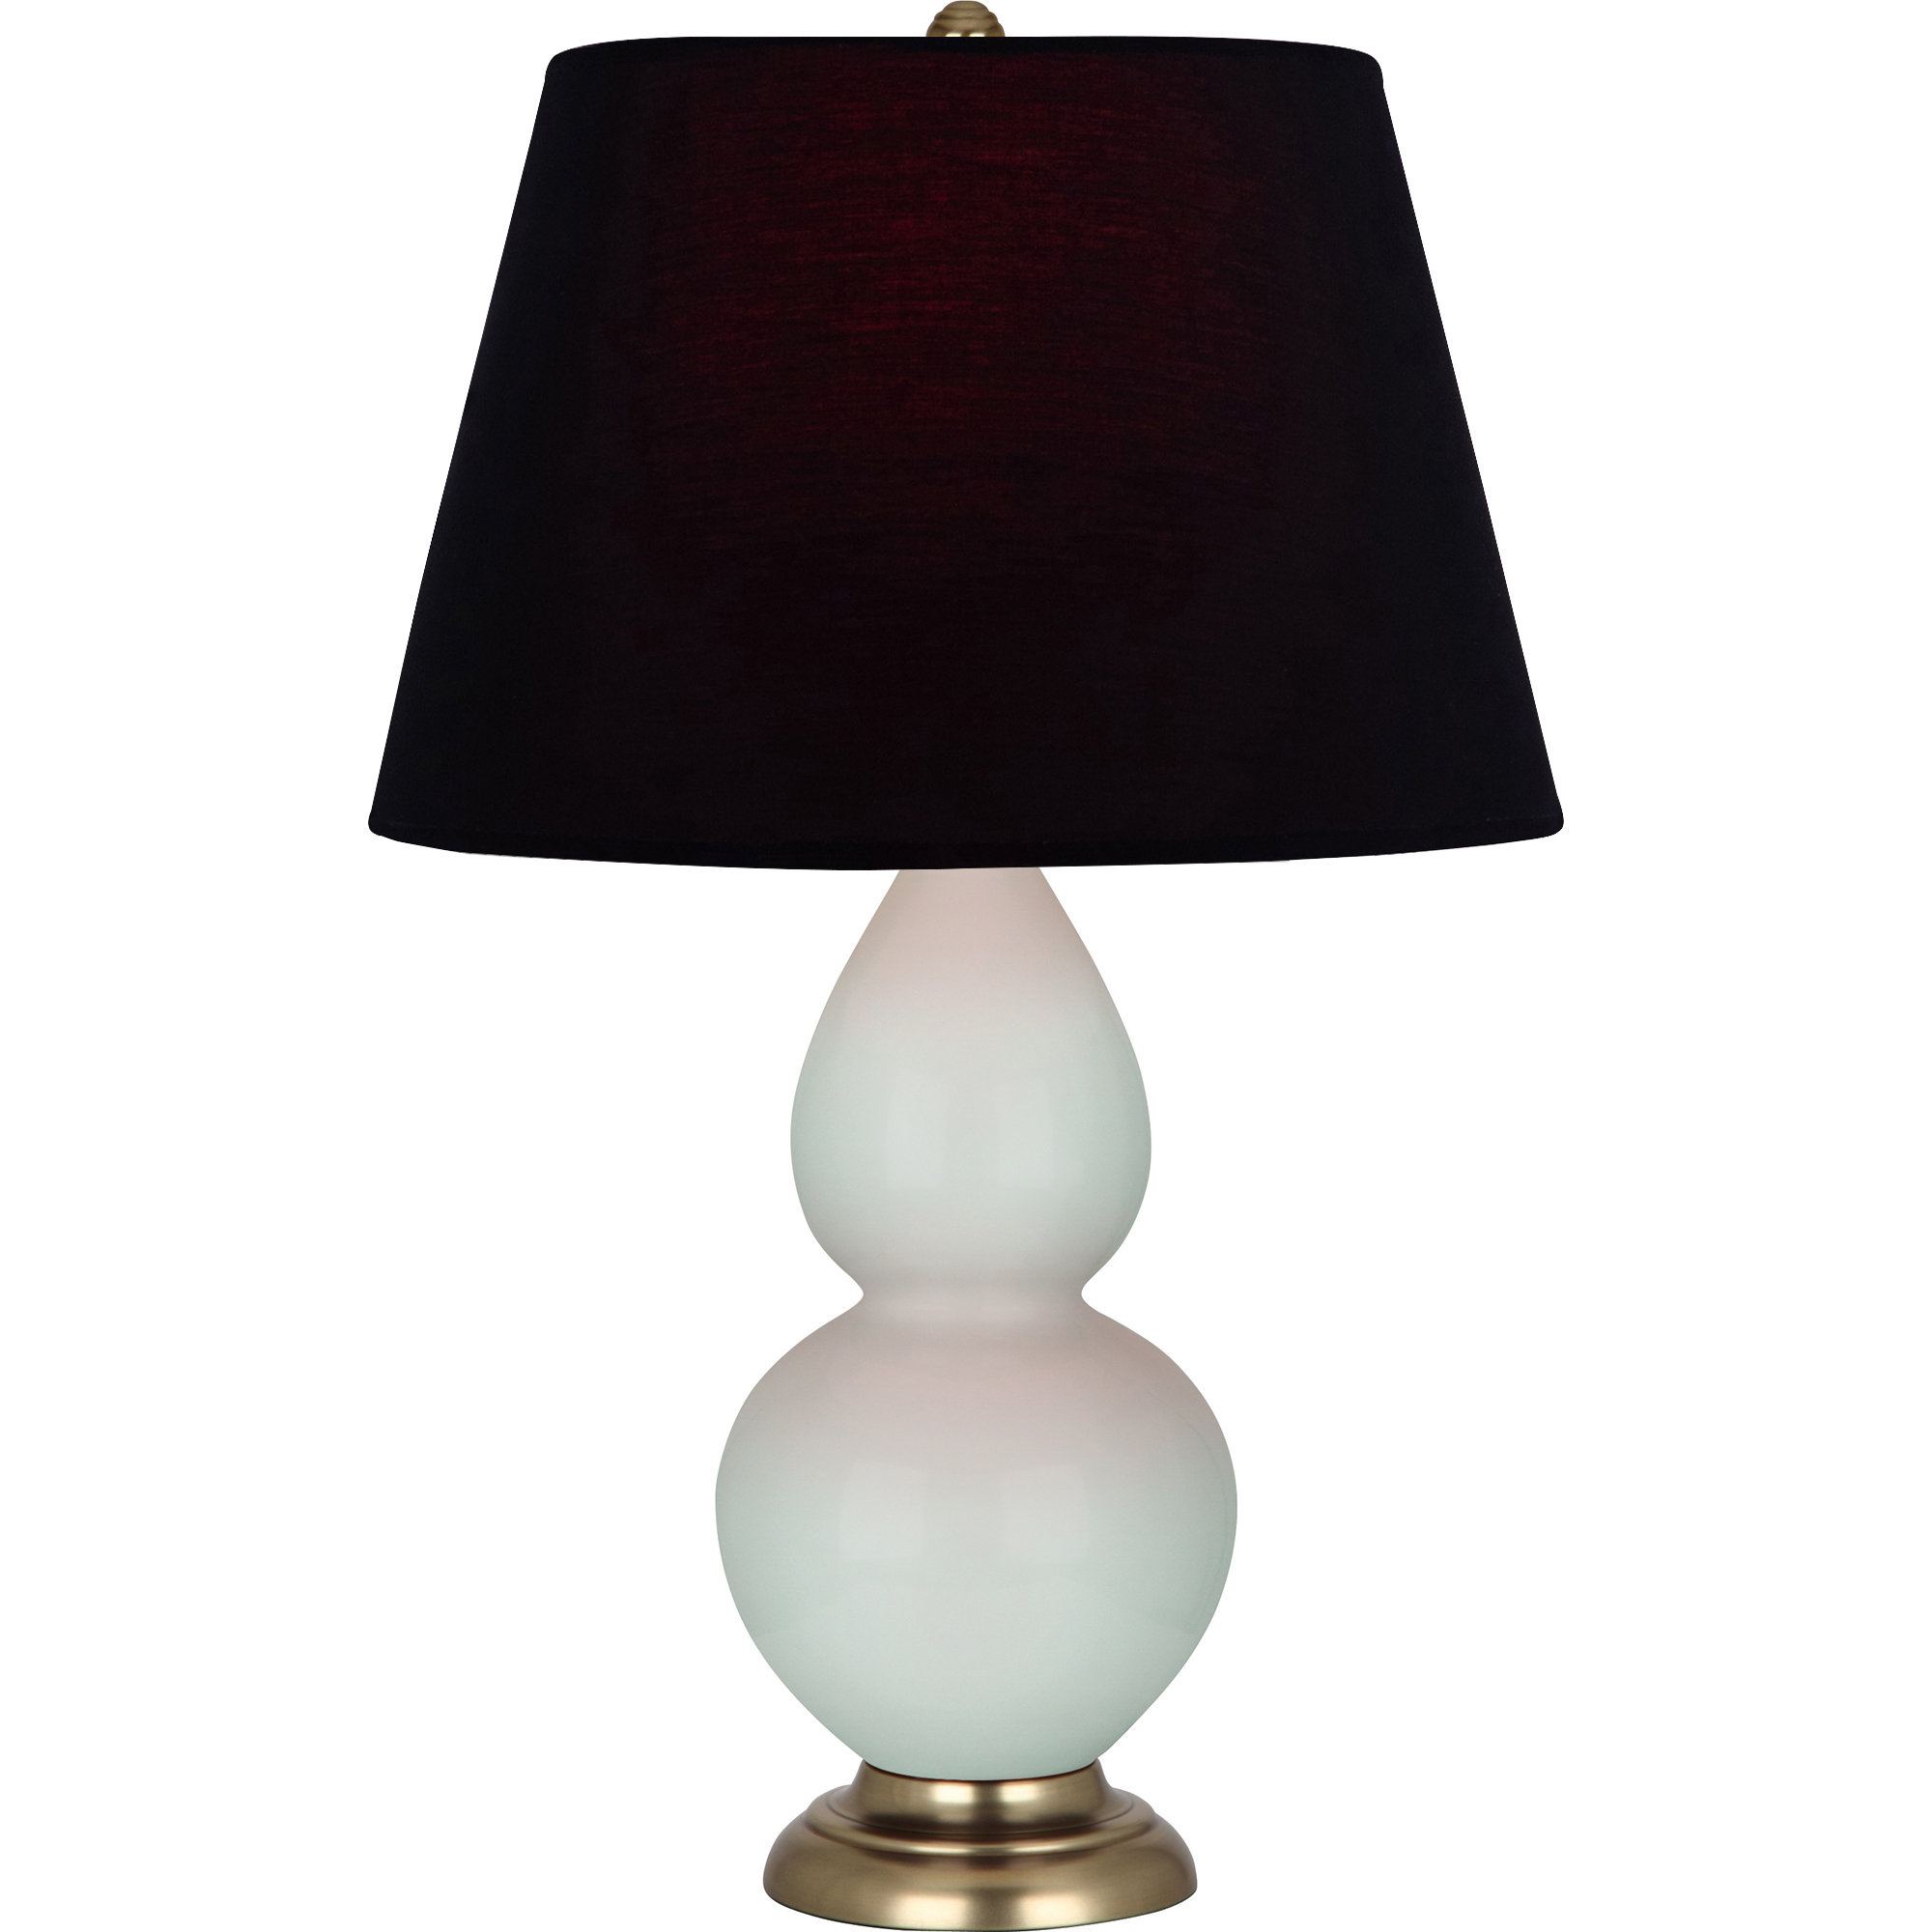 Double Gourd Table Lamp Style #1789K